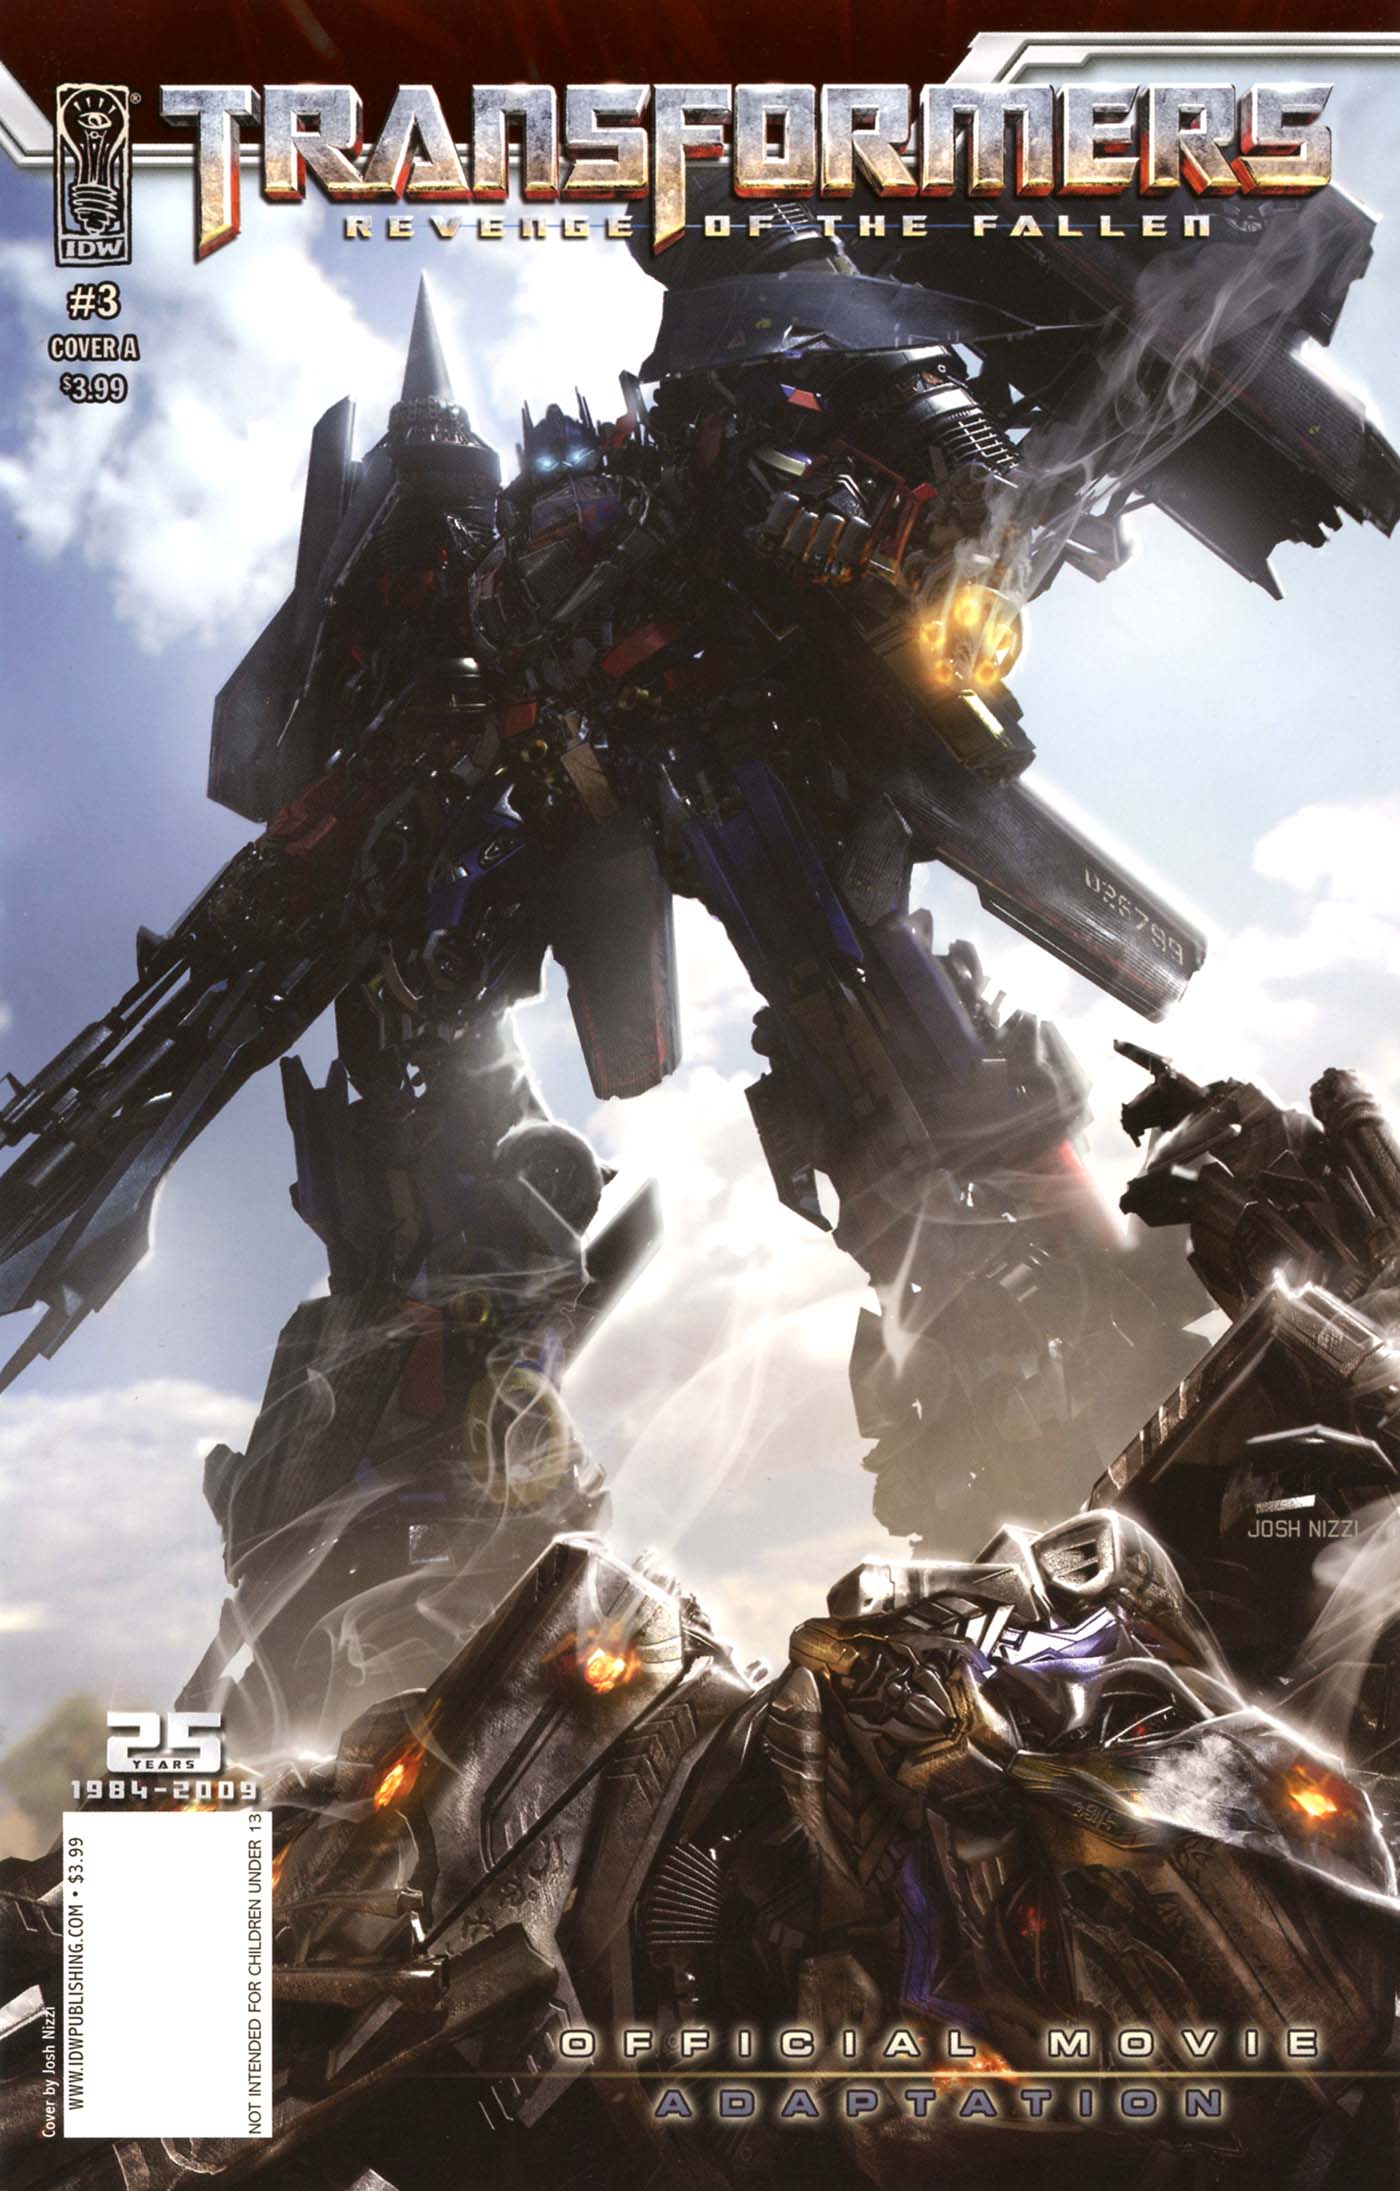 Read online Transformers: Revenge of the Fallen — Official Movie Adaptation comic -  Issue #3 - 1